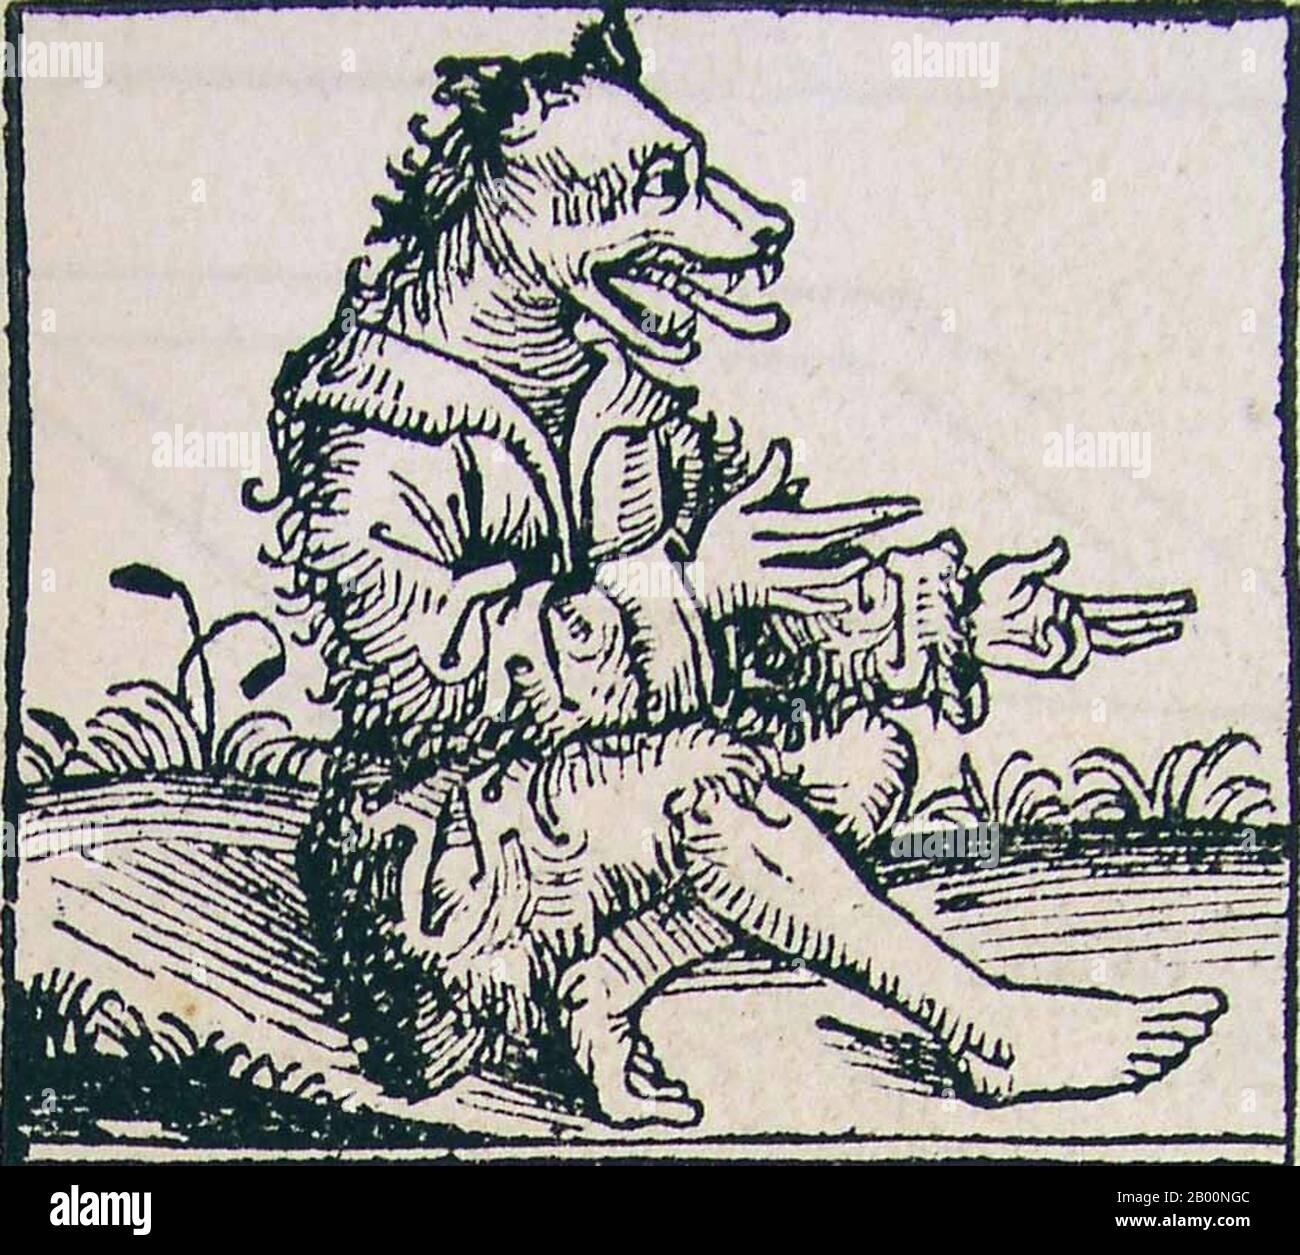 Germany: 'Man With A Dog's Head'. The Nuremberg Chronicle, by Hartmann Schedel (1440-1514), 1493.  The Nuremberg Chronicle is an illustrated world history. Its structure follows the story of human history as related in the Bible, including the histories of a number of important Western cities. Written in Latin by Hartmann Schedel, with a version in German translation by Georg Alt, it appeared in 1493. It is one of the best-documented early printed books. It is classified as an incunabulum, a book, pamphlet, or broadside that was printed (not handwritten) before the year 1501 in Europe. Stock Photo